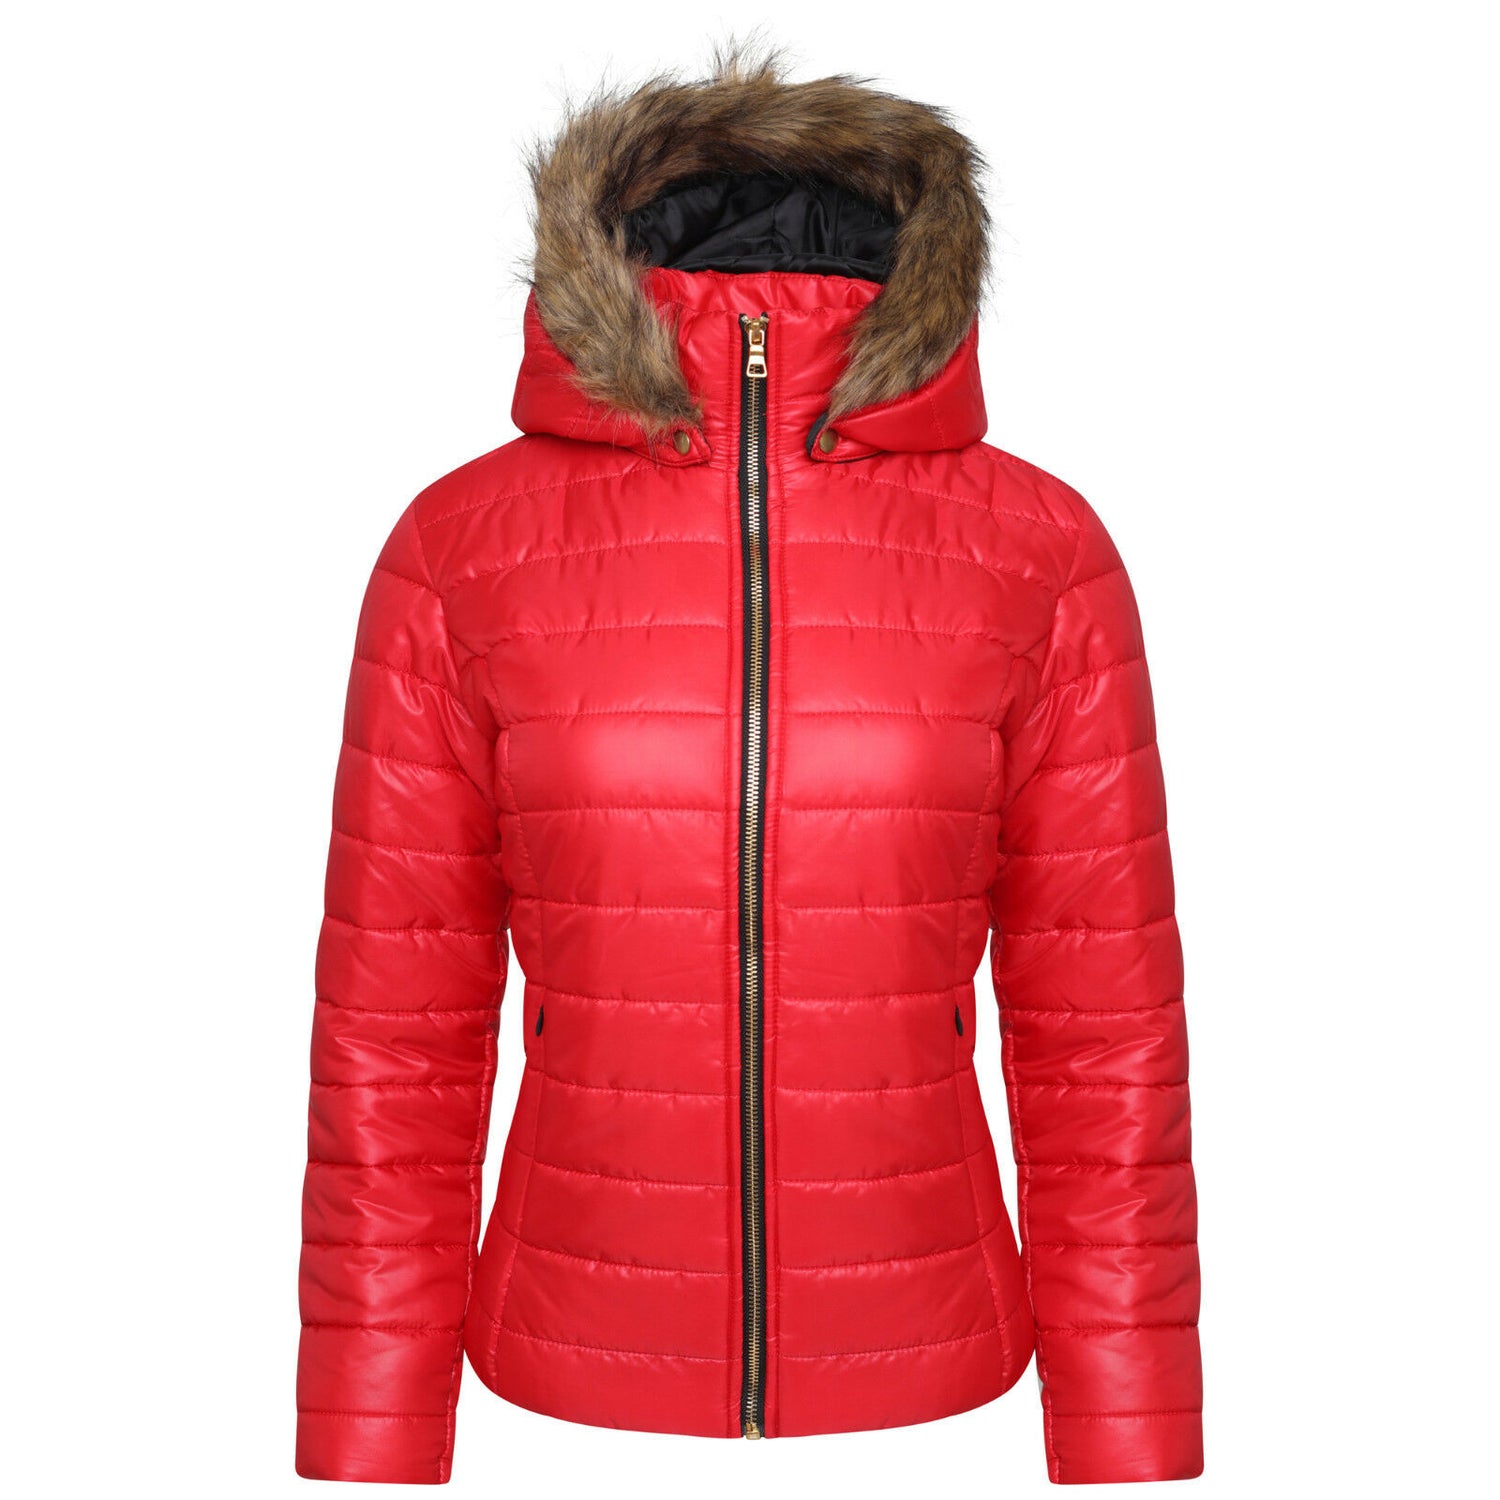 Ladies Red Wet Look Short Length Coat. It Has A Detachable Fur Hood 2 Front Zip Pockets And Is a Zip Up Coat. Available In Sizes 8-14.